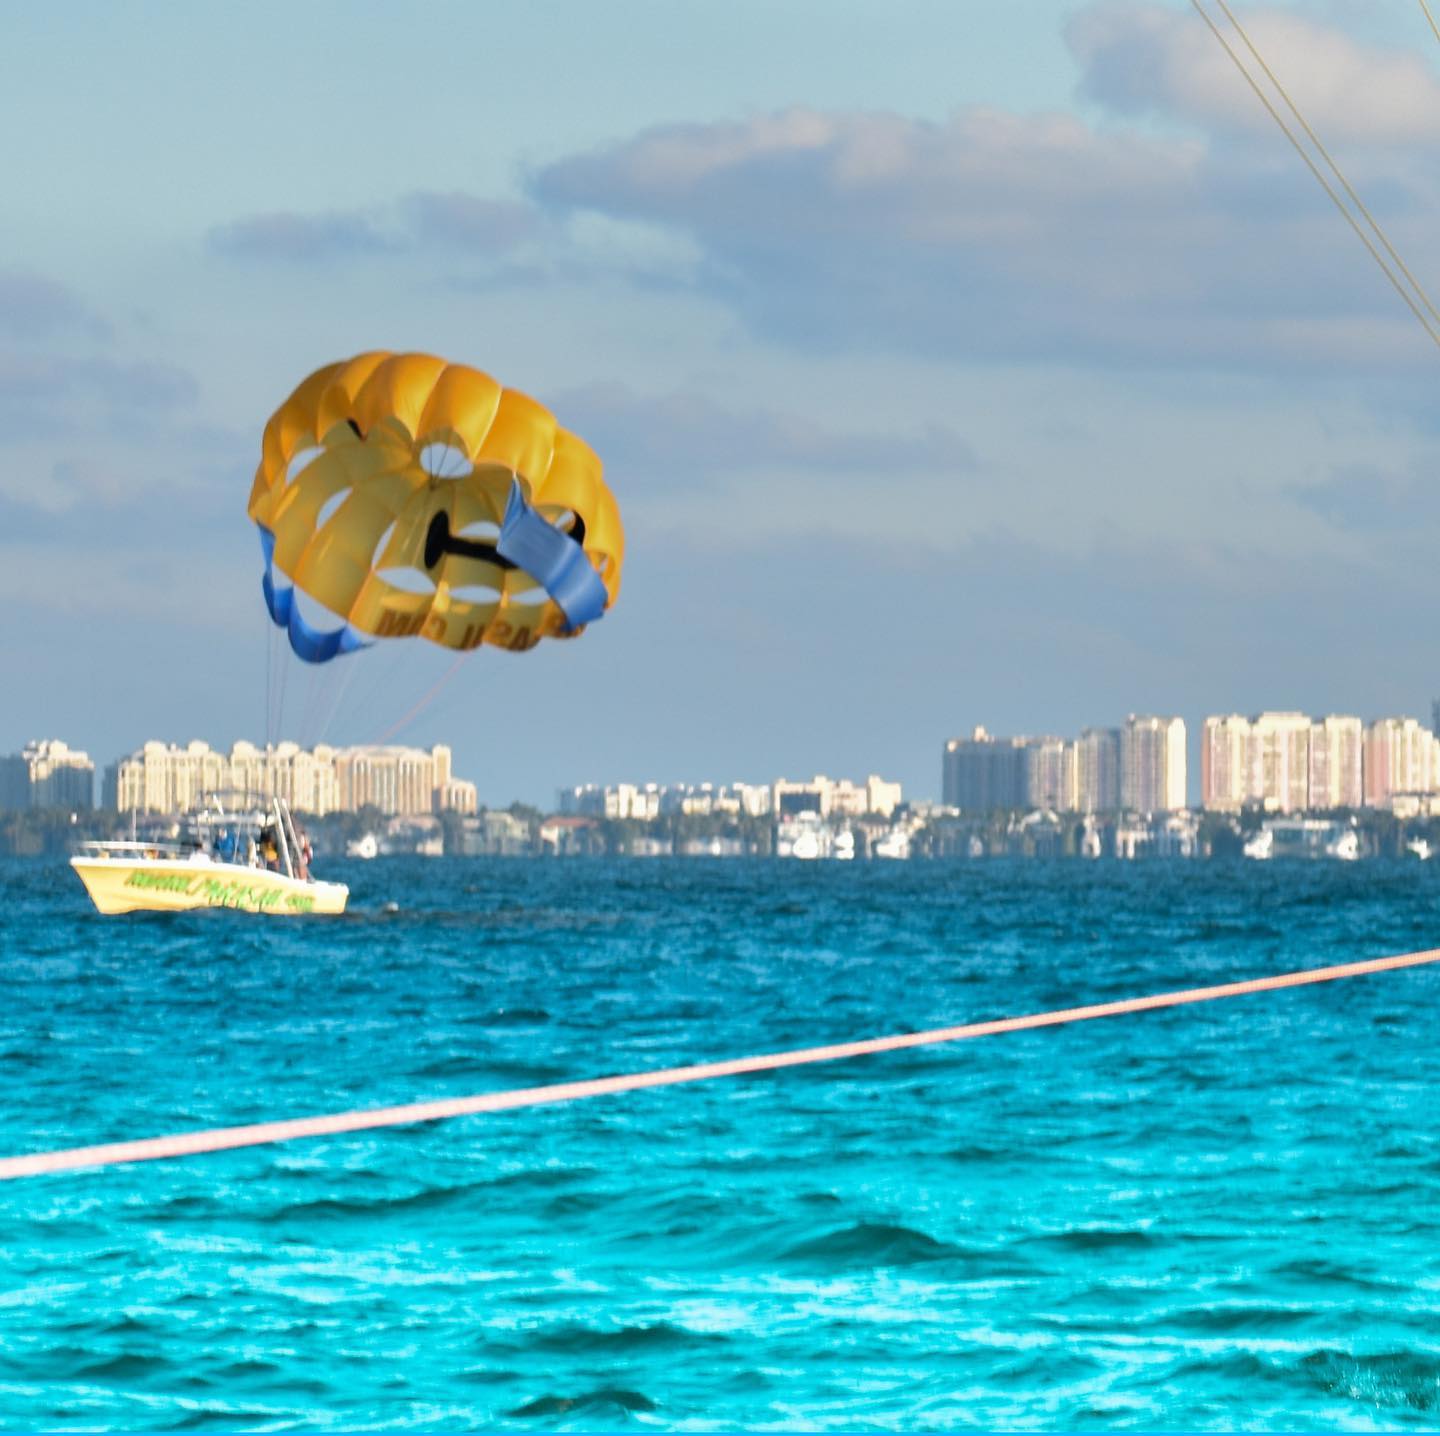 Sky view while parasailing in Miami